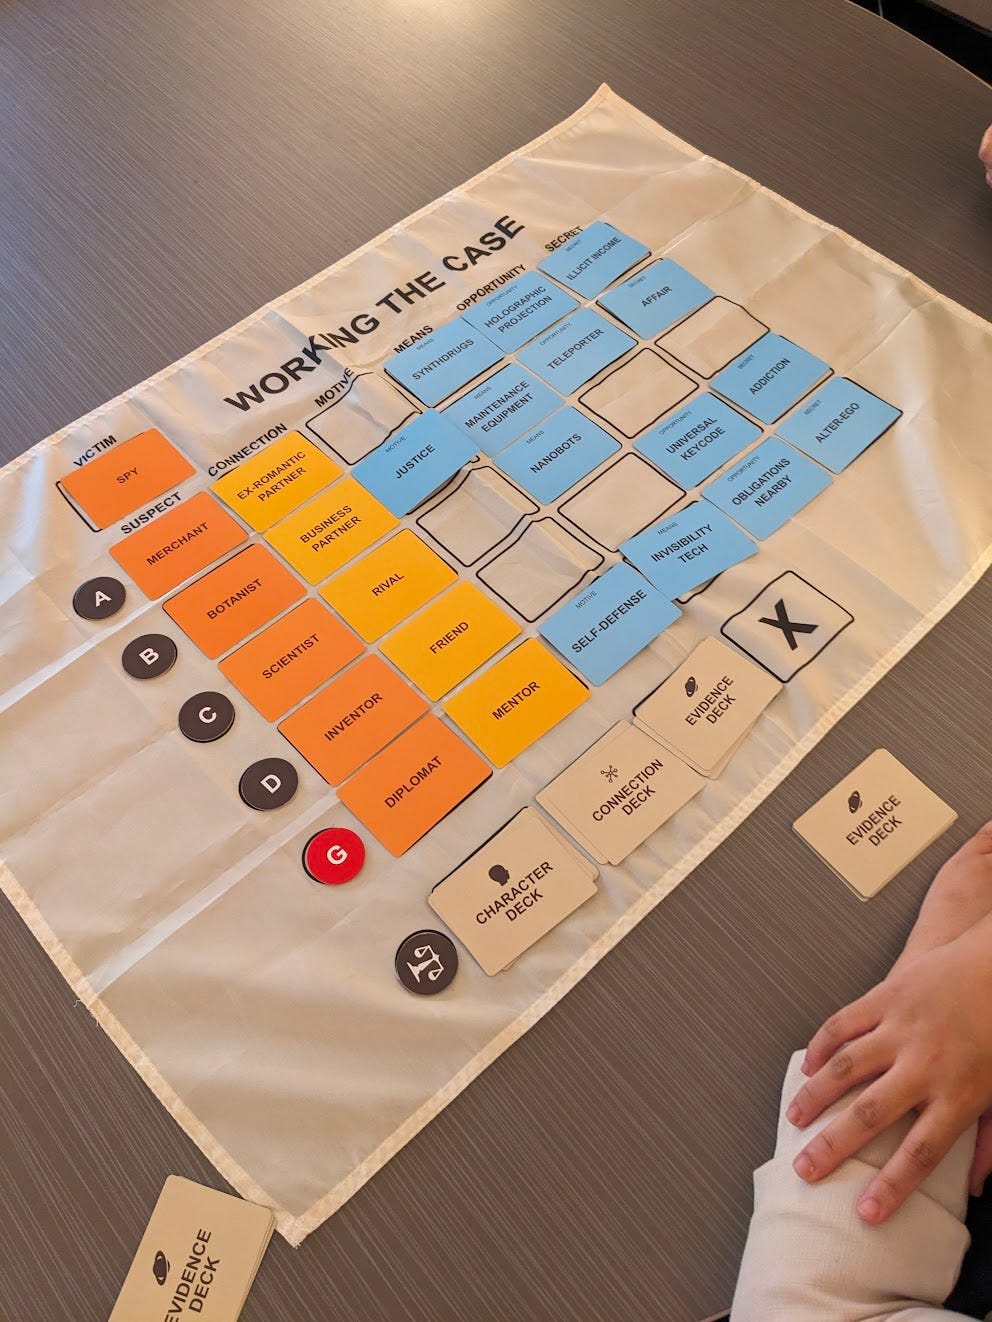 A cloth mat game board titled "Working the Case" covered in yellow, orange, and blue cards in a grid. The cards represent the people, relationships, and evidence involved.